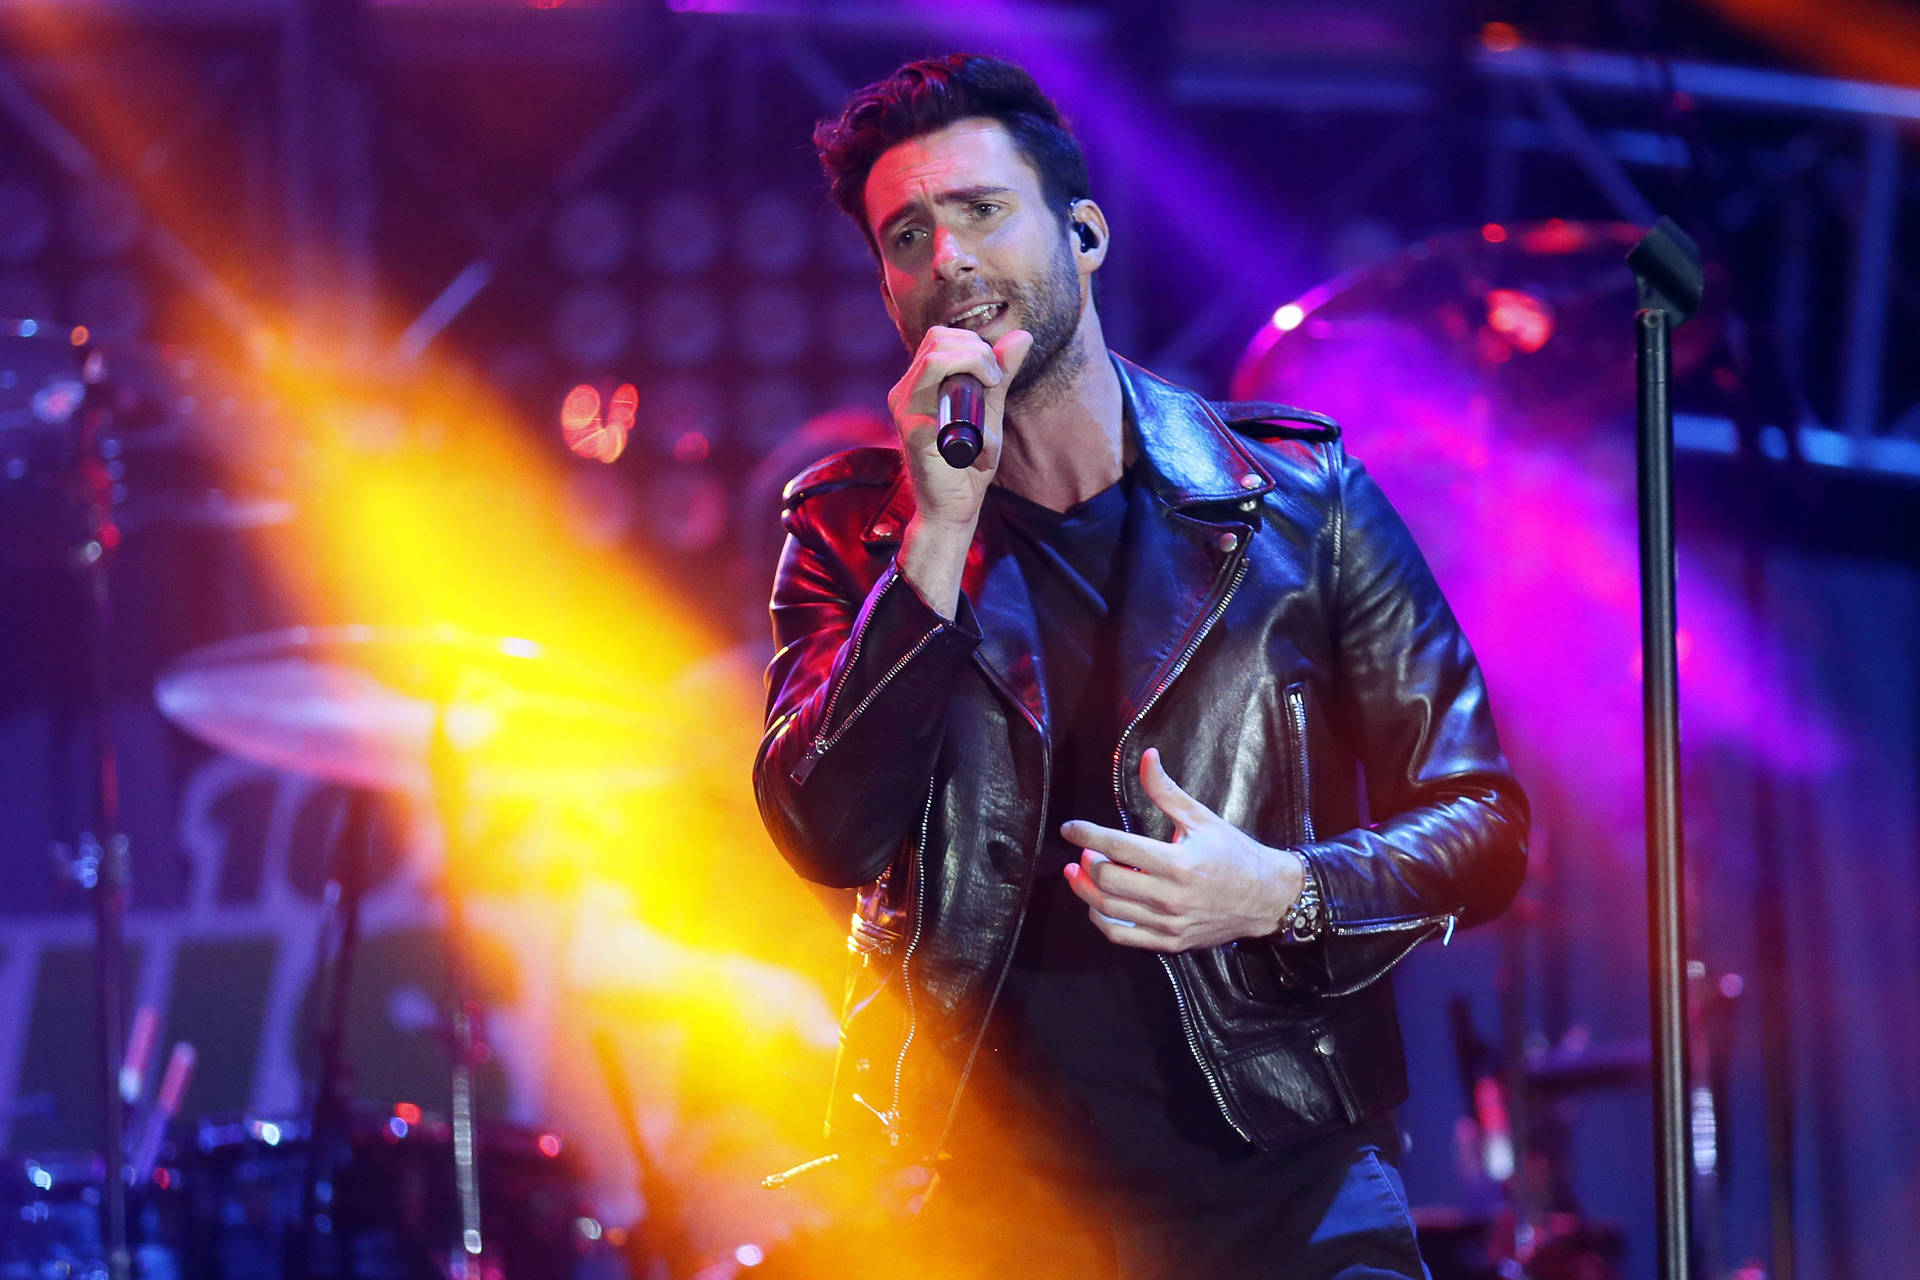 Adam Levine Flaunting His Style In A Black Leather Jacket